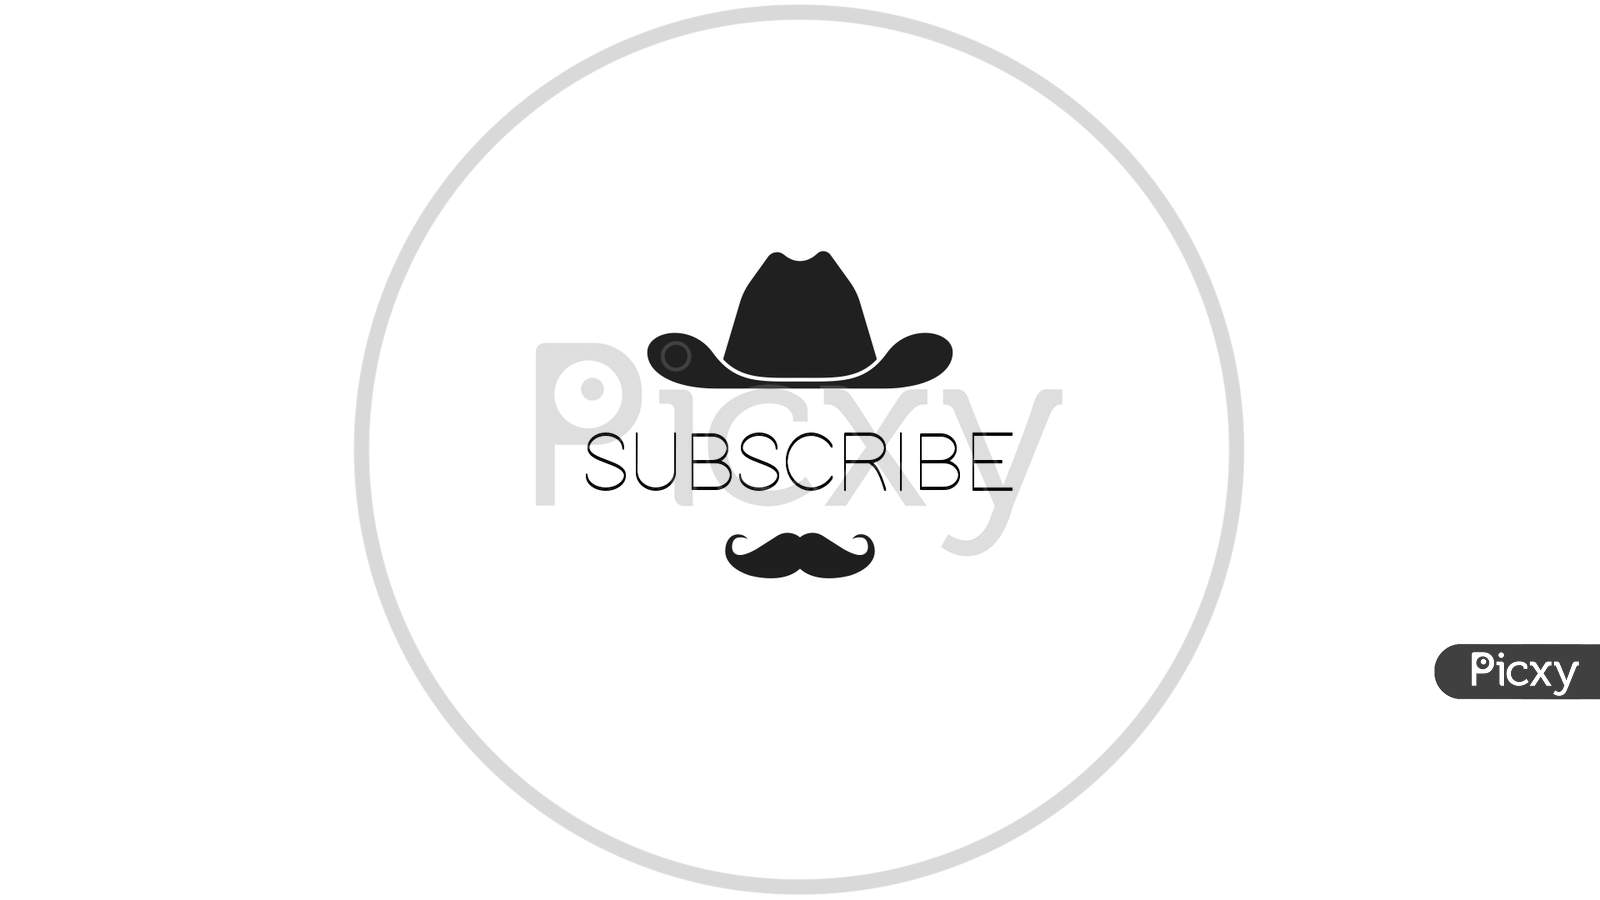 Subscribe notification on white background with a men moustache